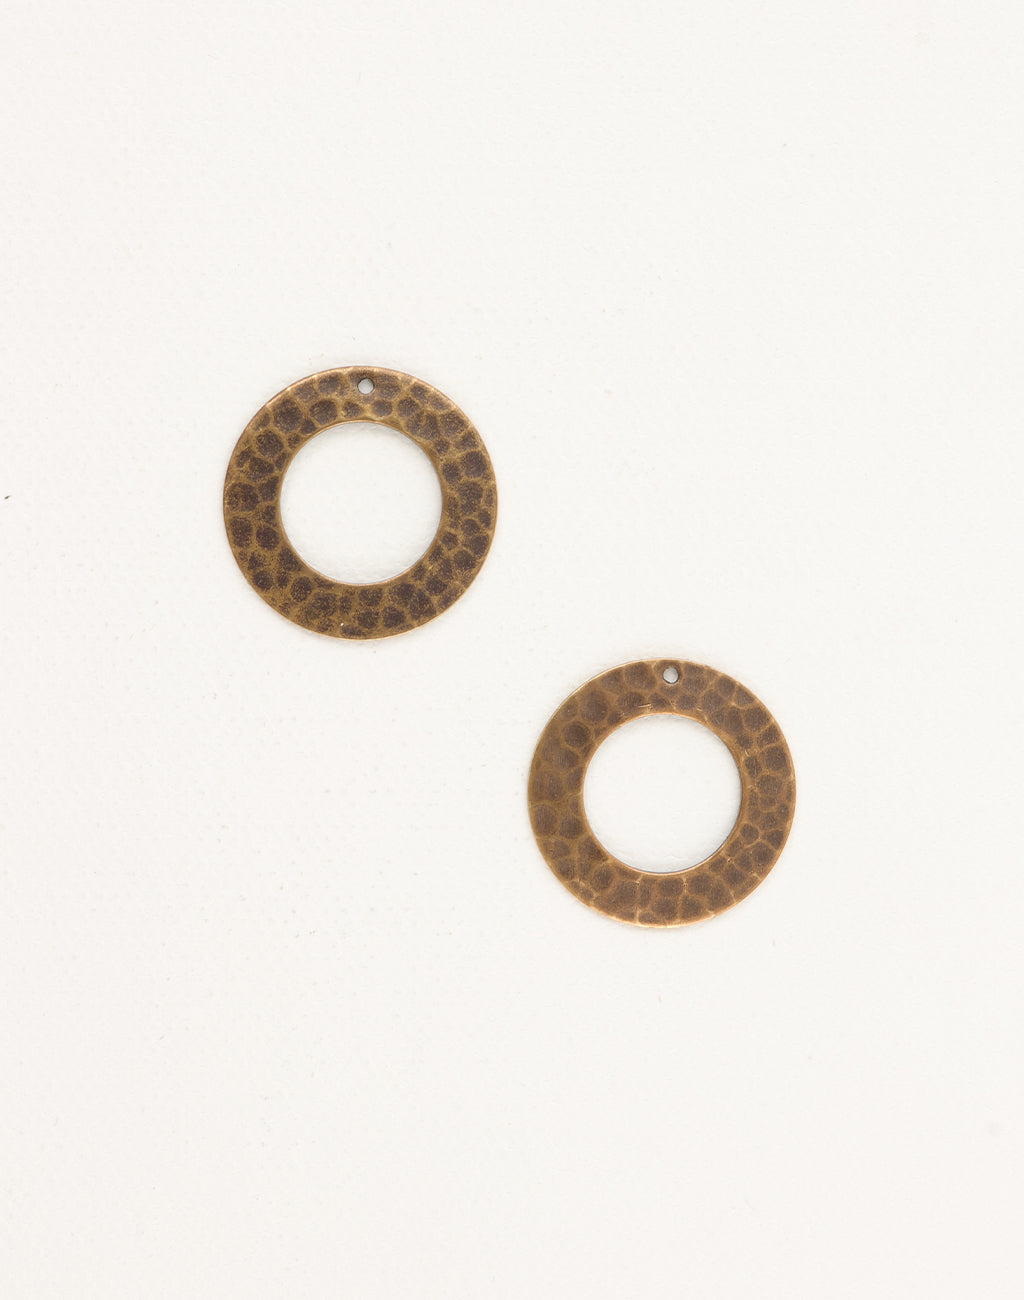 Hammered Ring, 22mm, (2pcs)